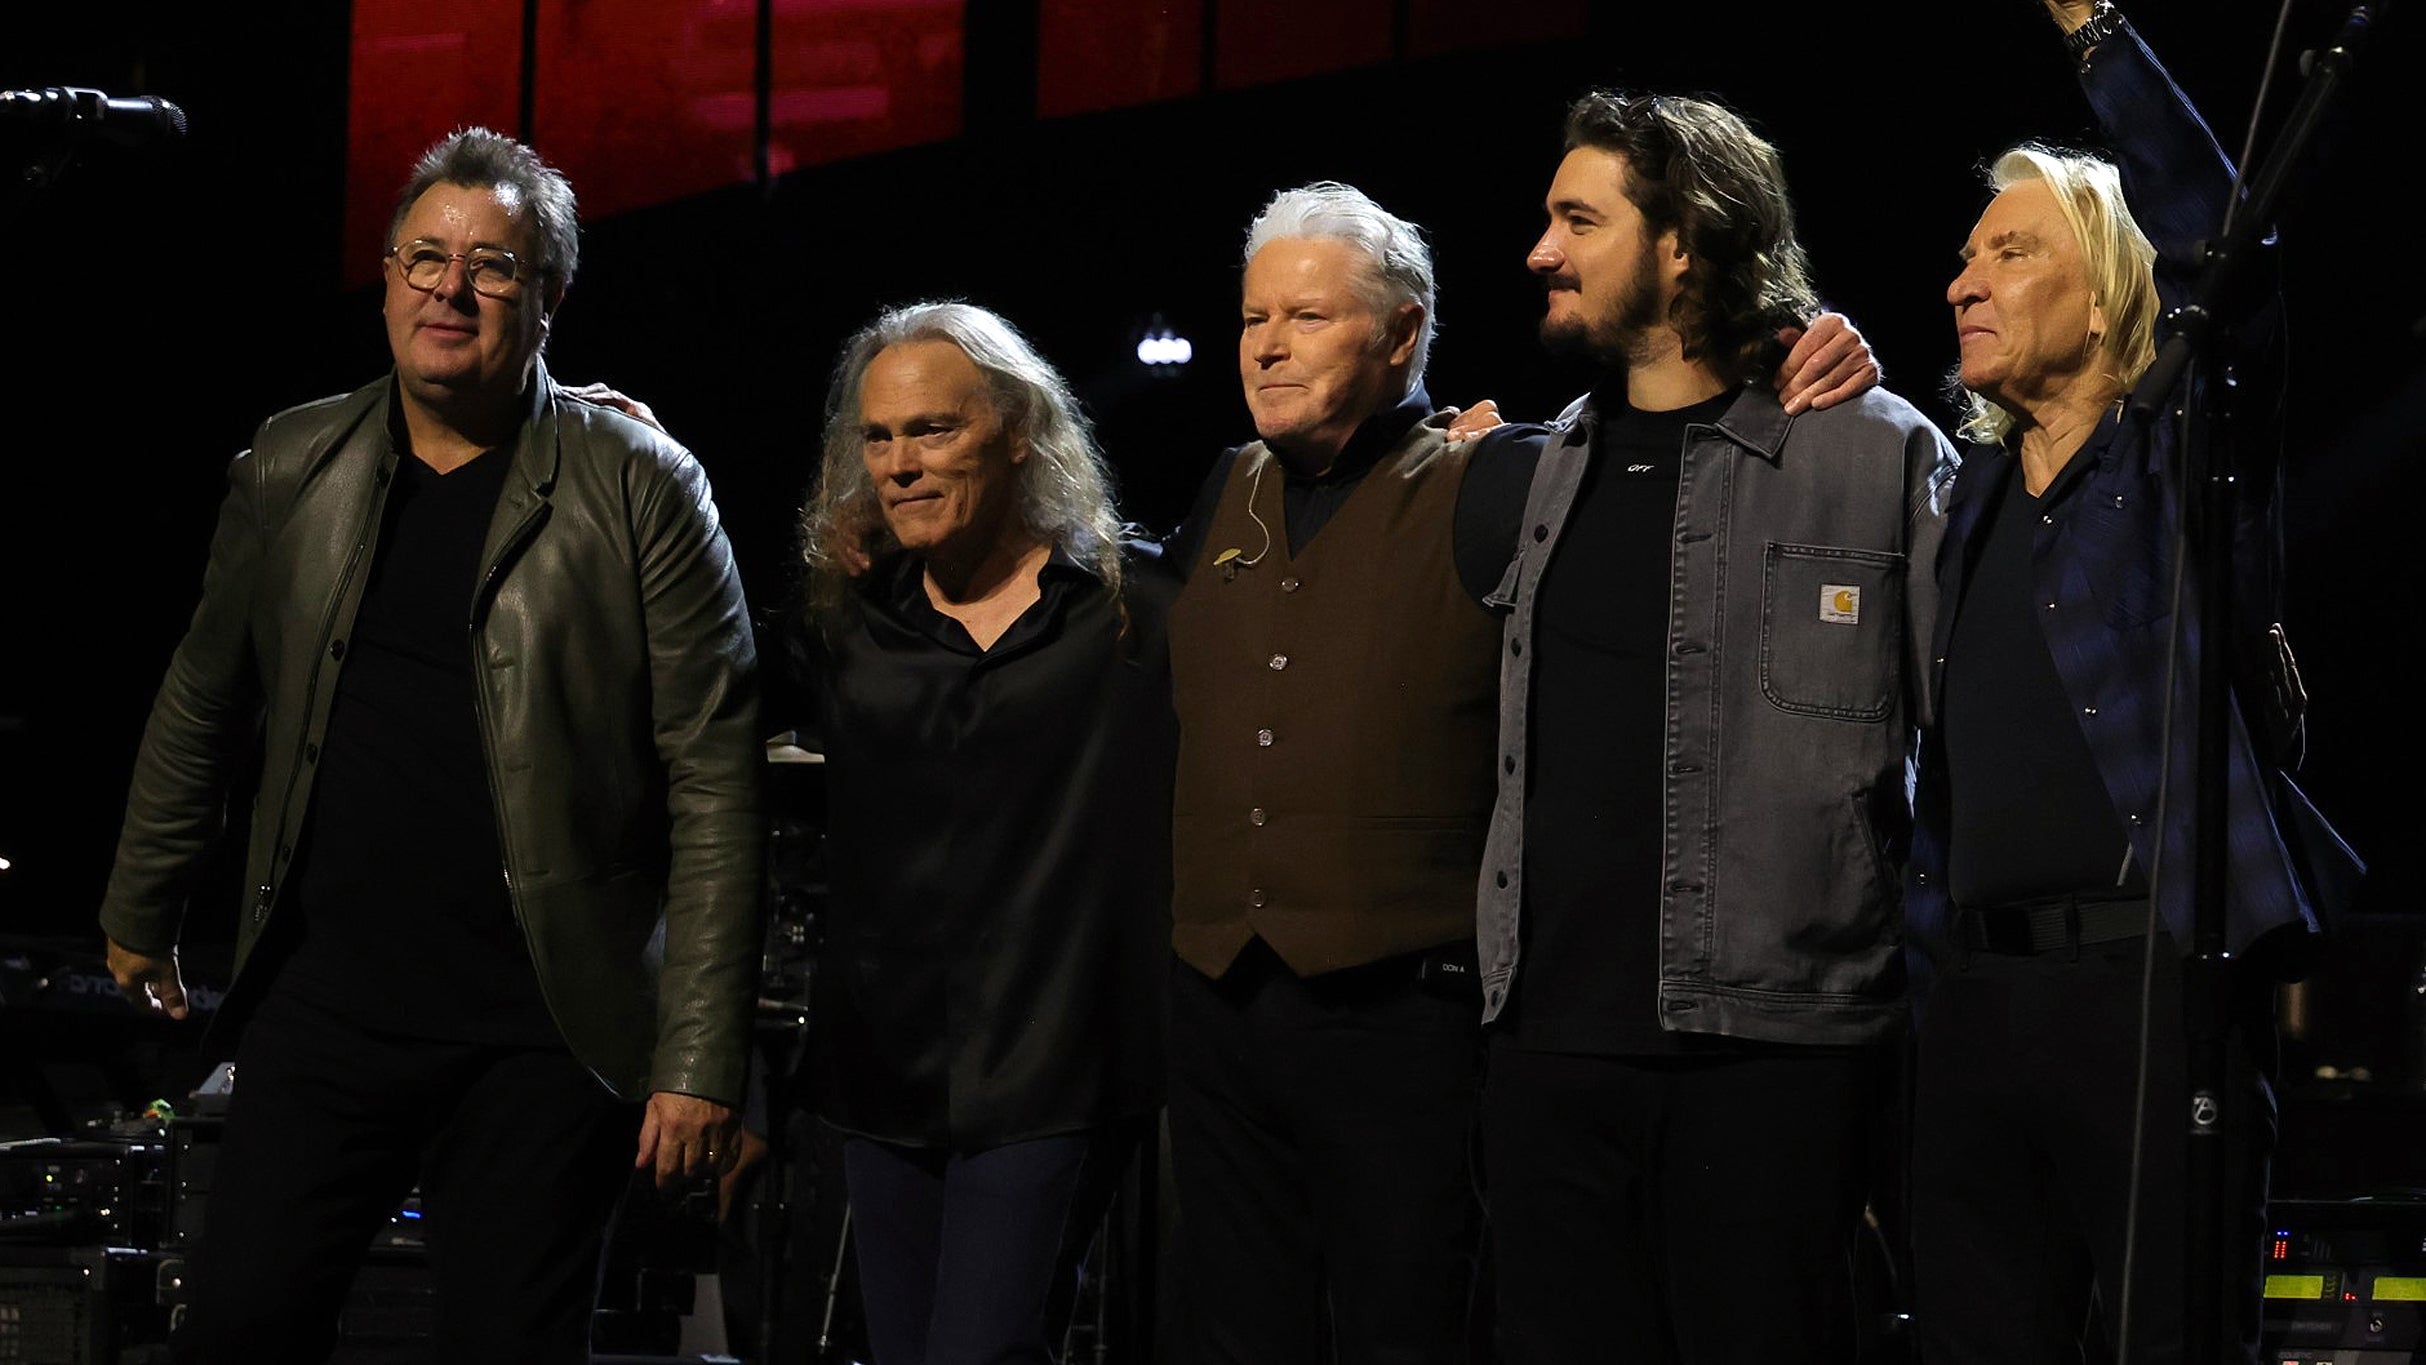 Eagles - The Long Goodbye free presale c0de for early tickets in Orlando